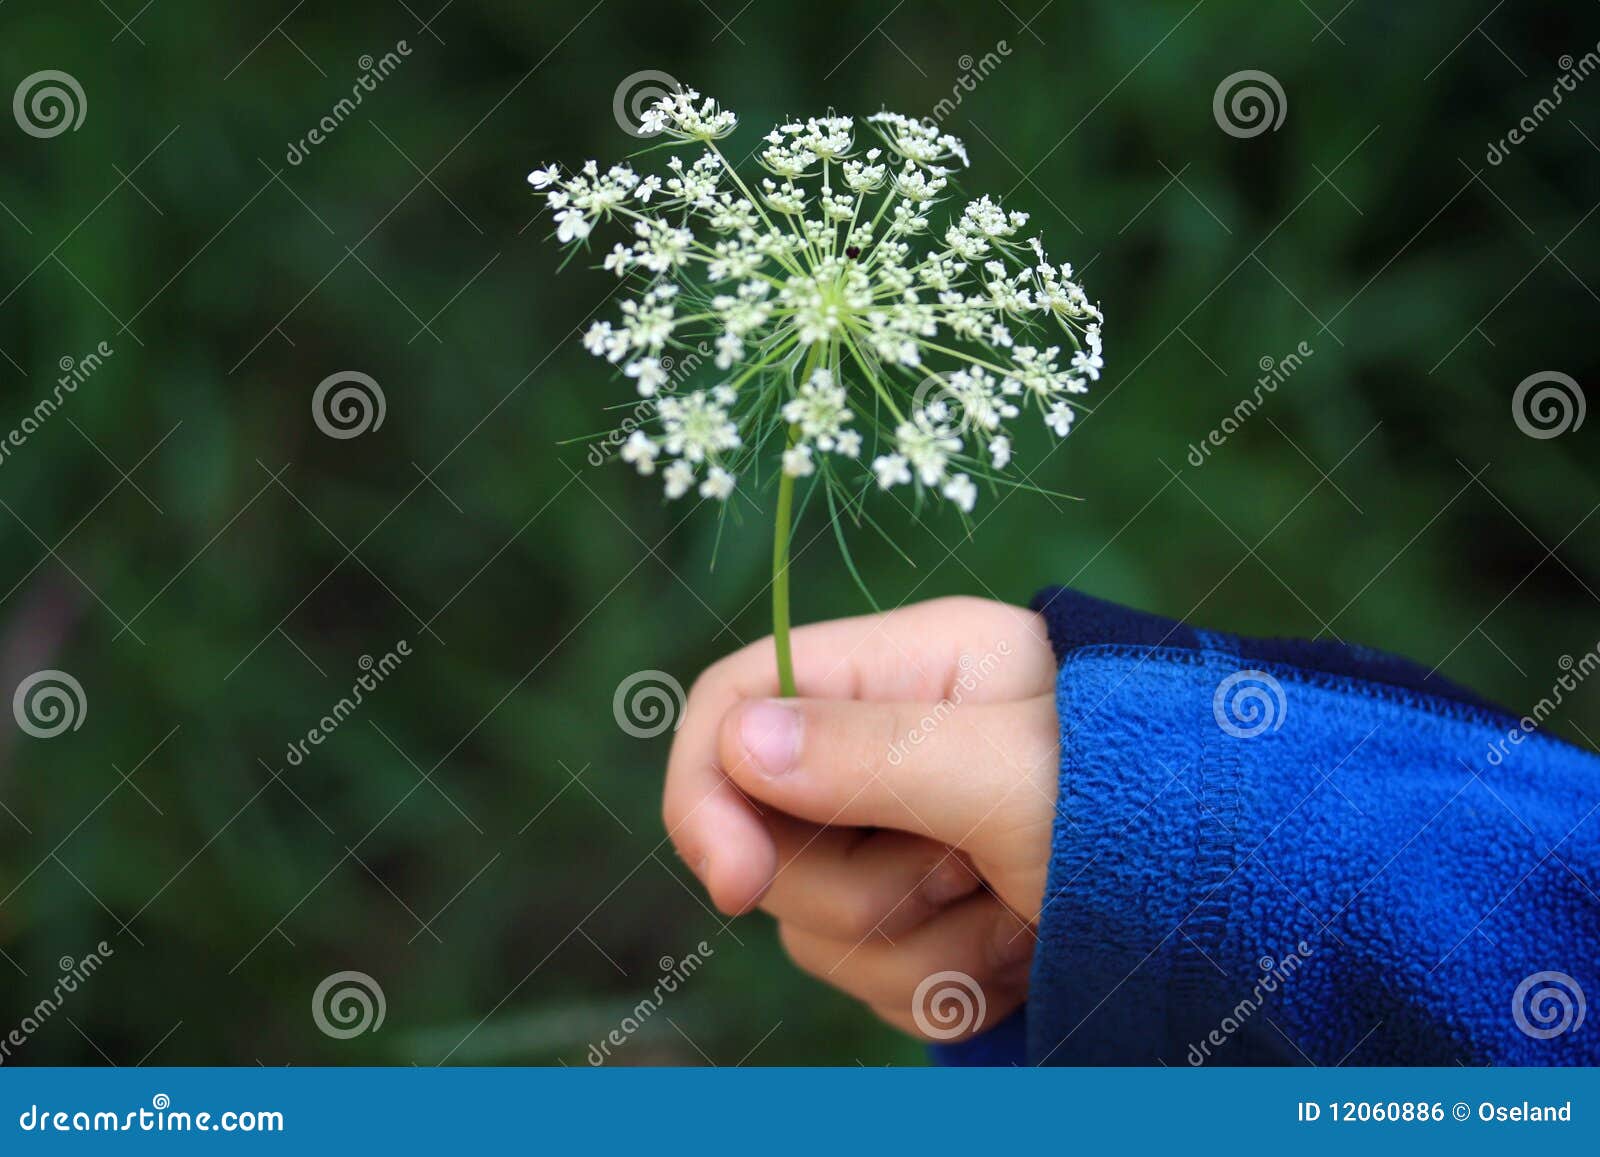 flower in a young child's hand.